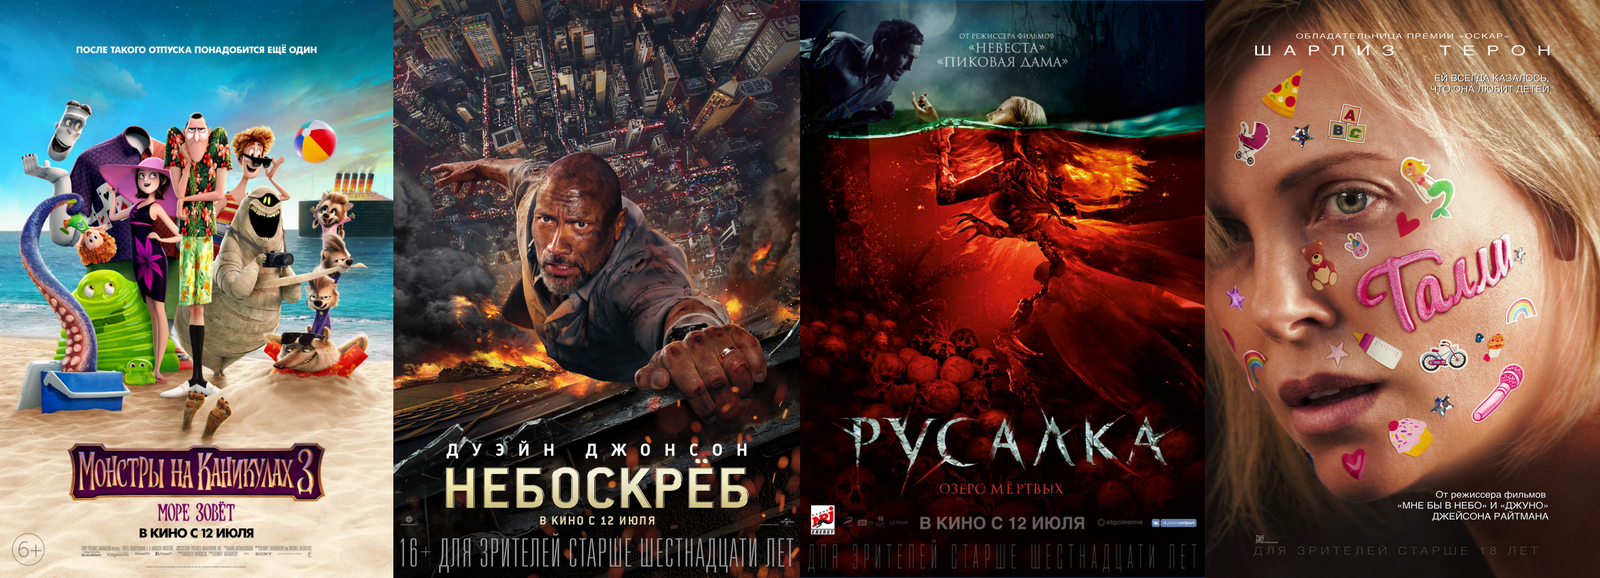 Russian box office receipts and distribution of screenings over the past weekend (July 12 - 15) - Movies, , Skyscraper, , , Box office fees, Film distribution